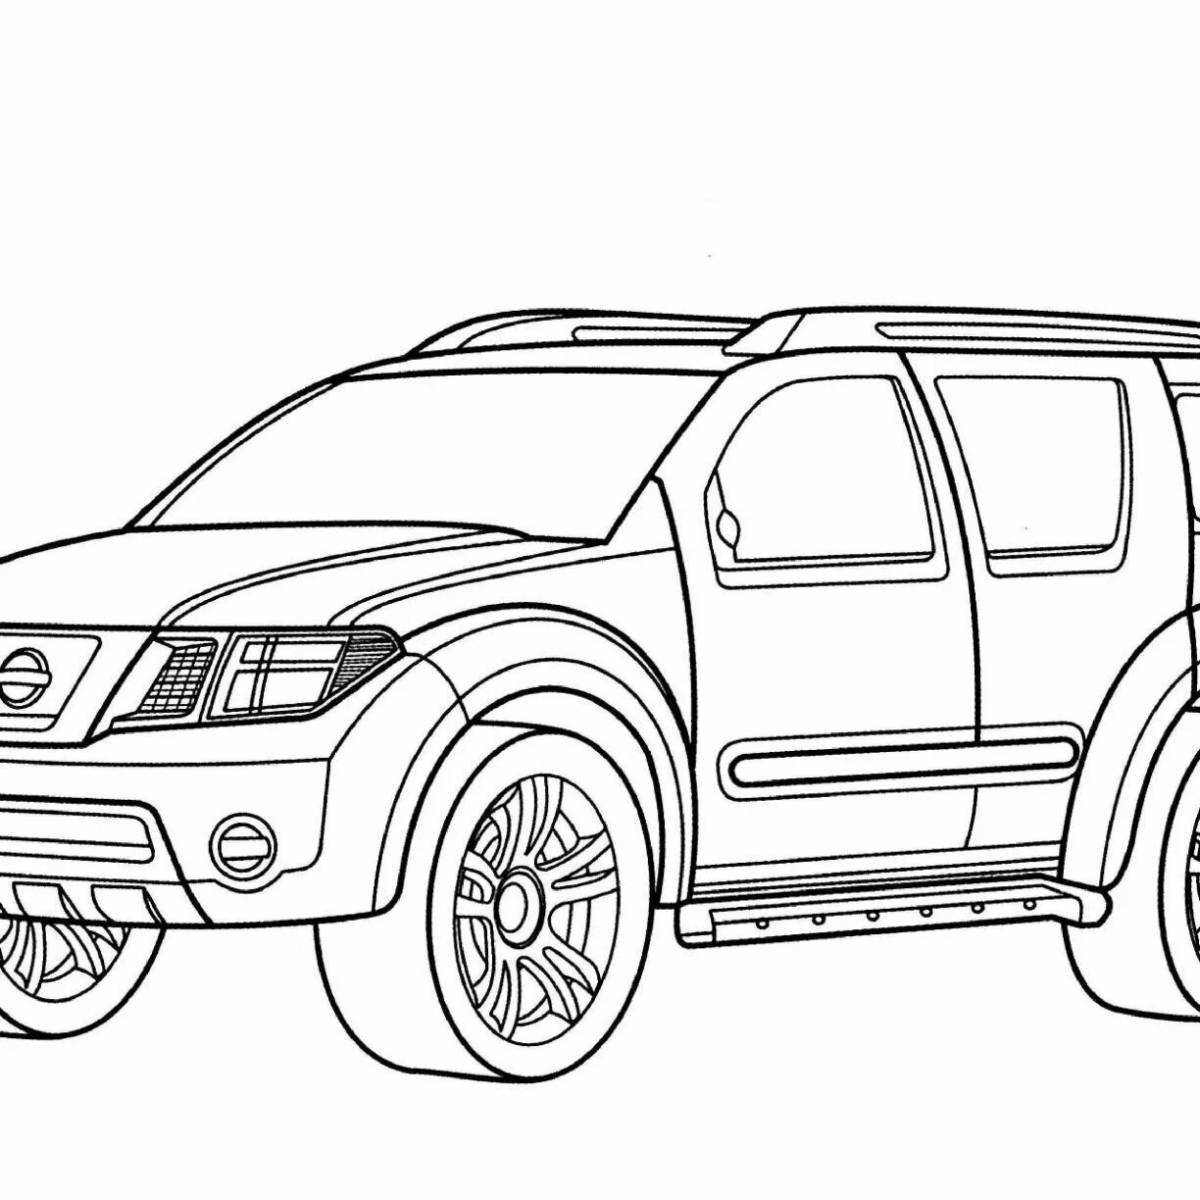 Coloring glossy nissan pathfinder